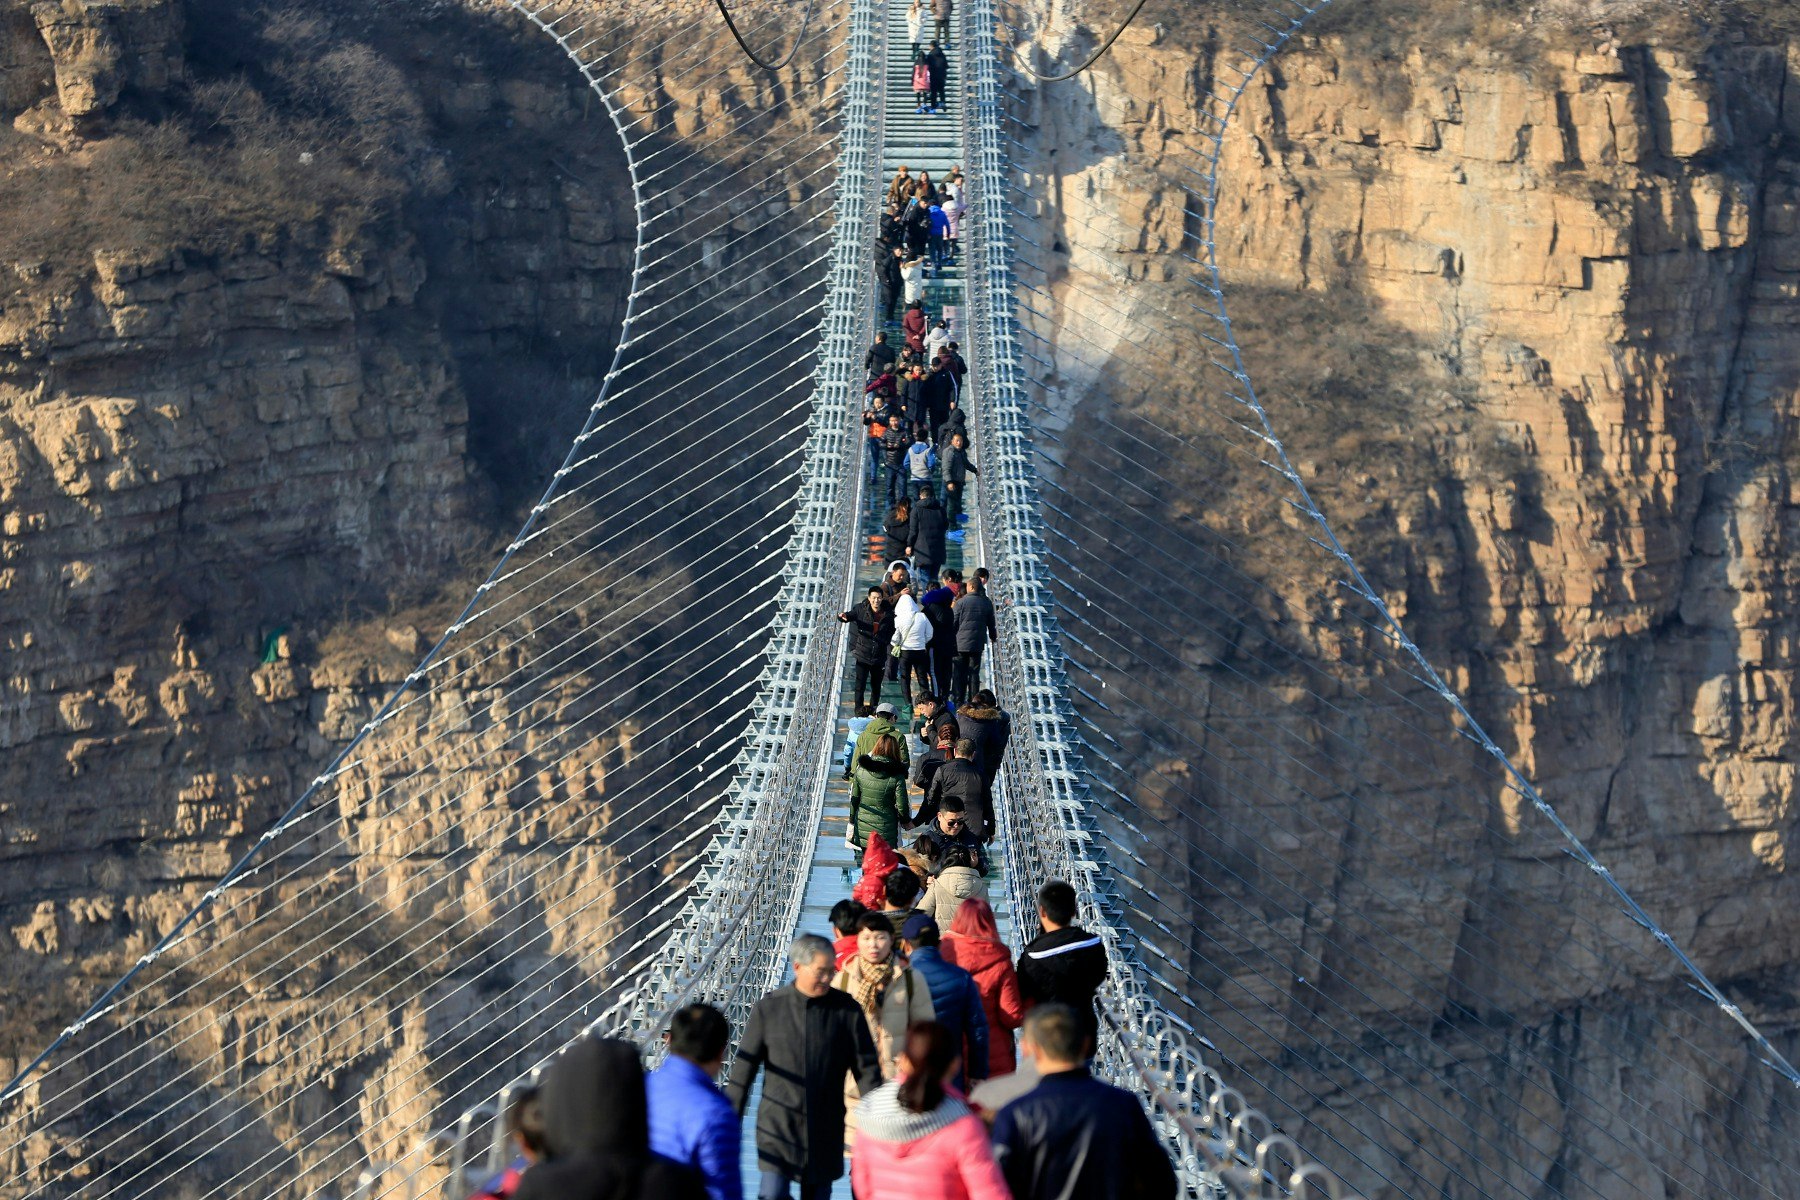 People crosssing a glass bridge in China